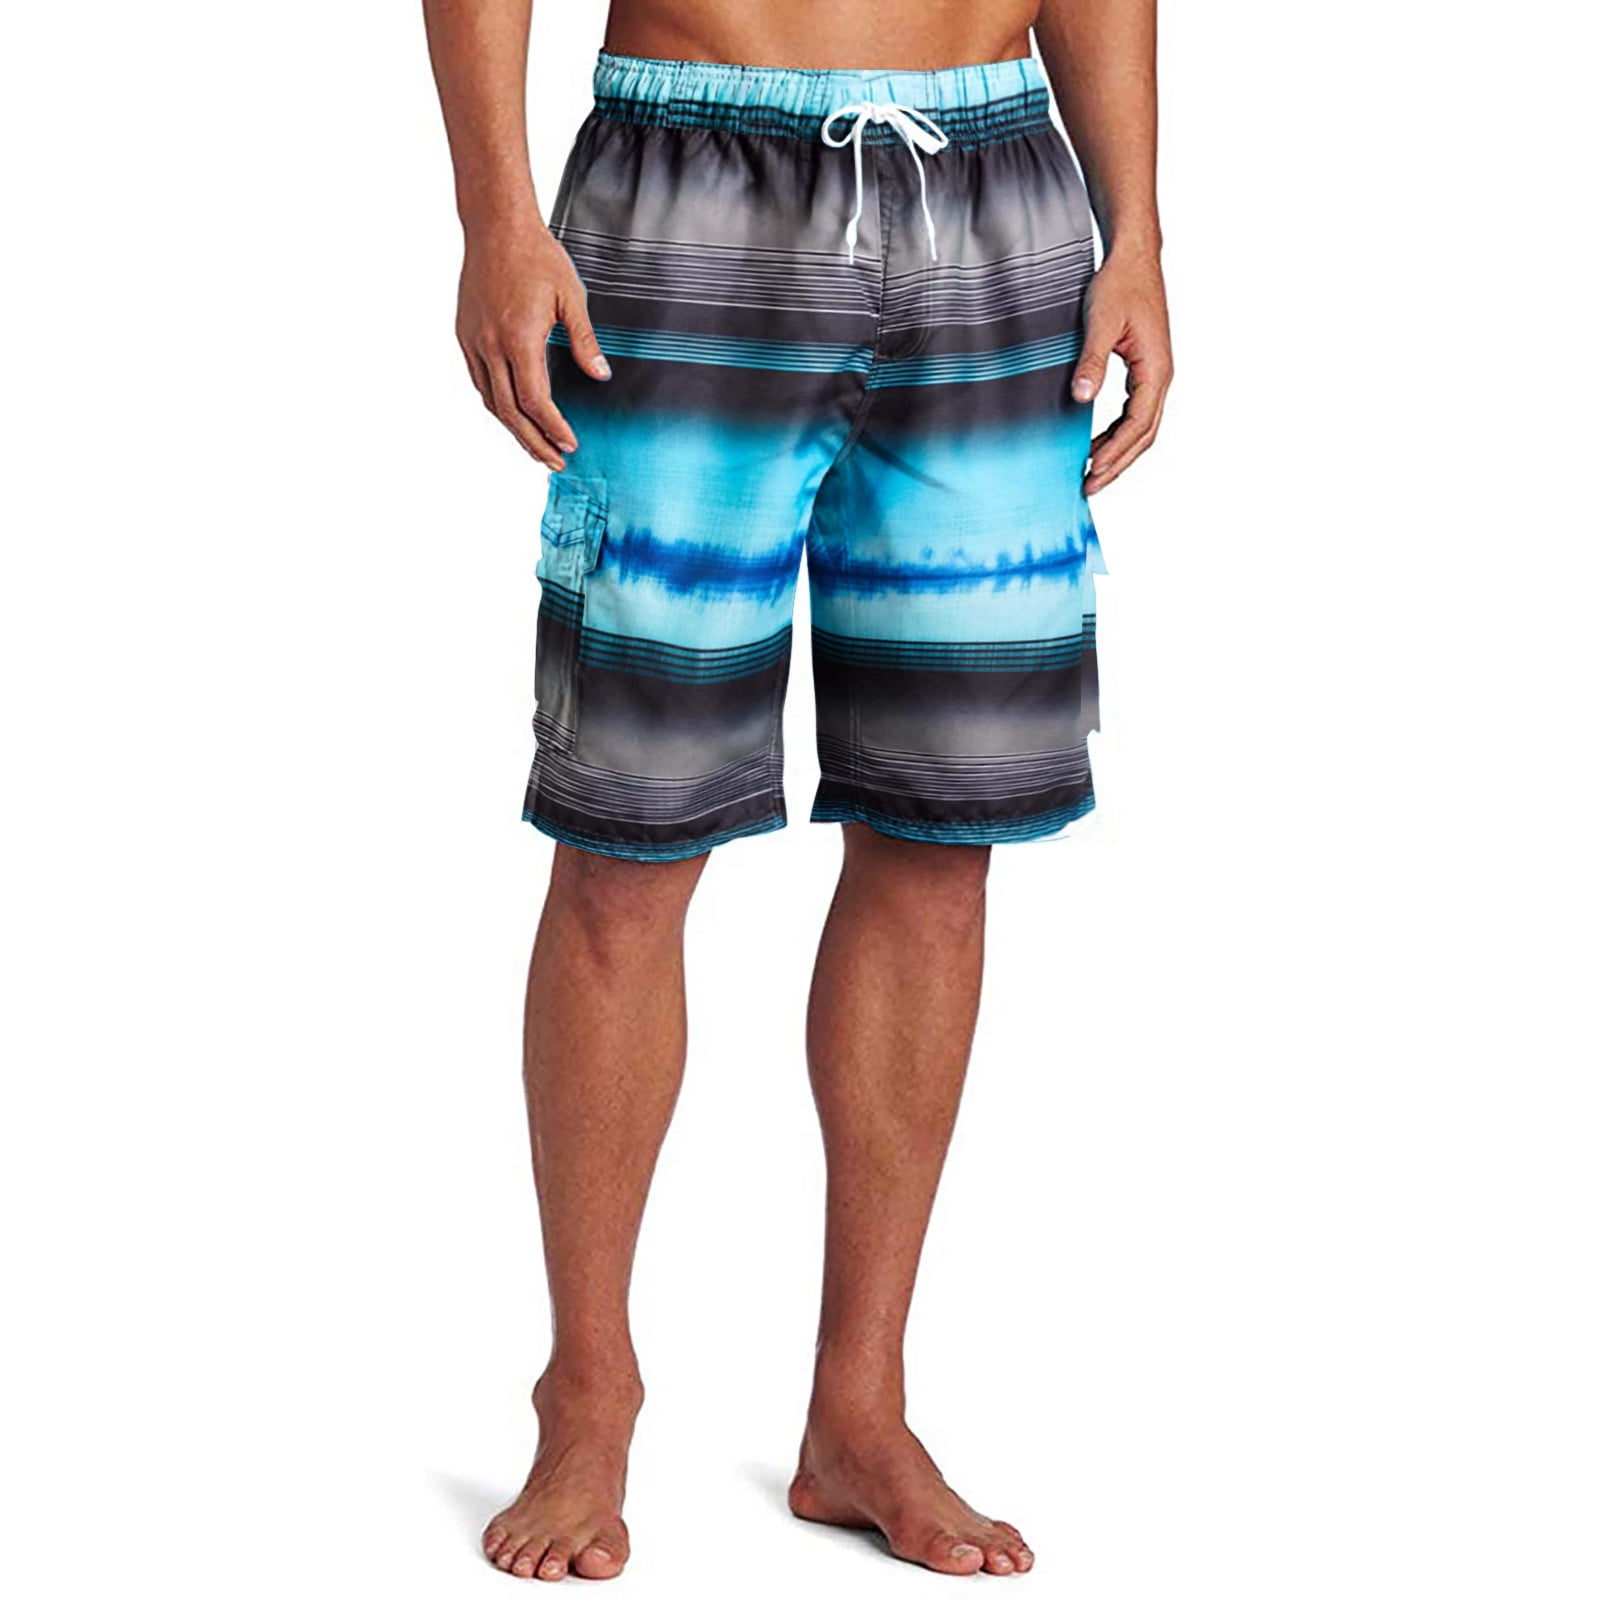 Leisue Colorful Patterns Quick Dry Elastic Lace Boardshorts Beach Shorts Pants Swim Trunks Man Swimsuit with Pockets 